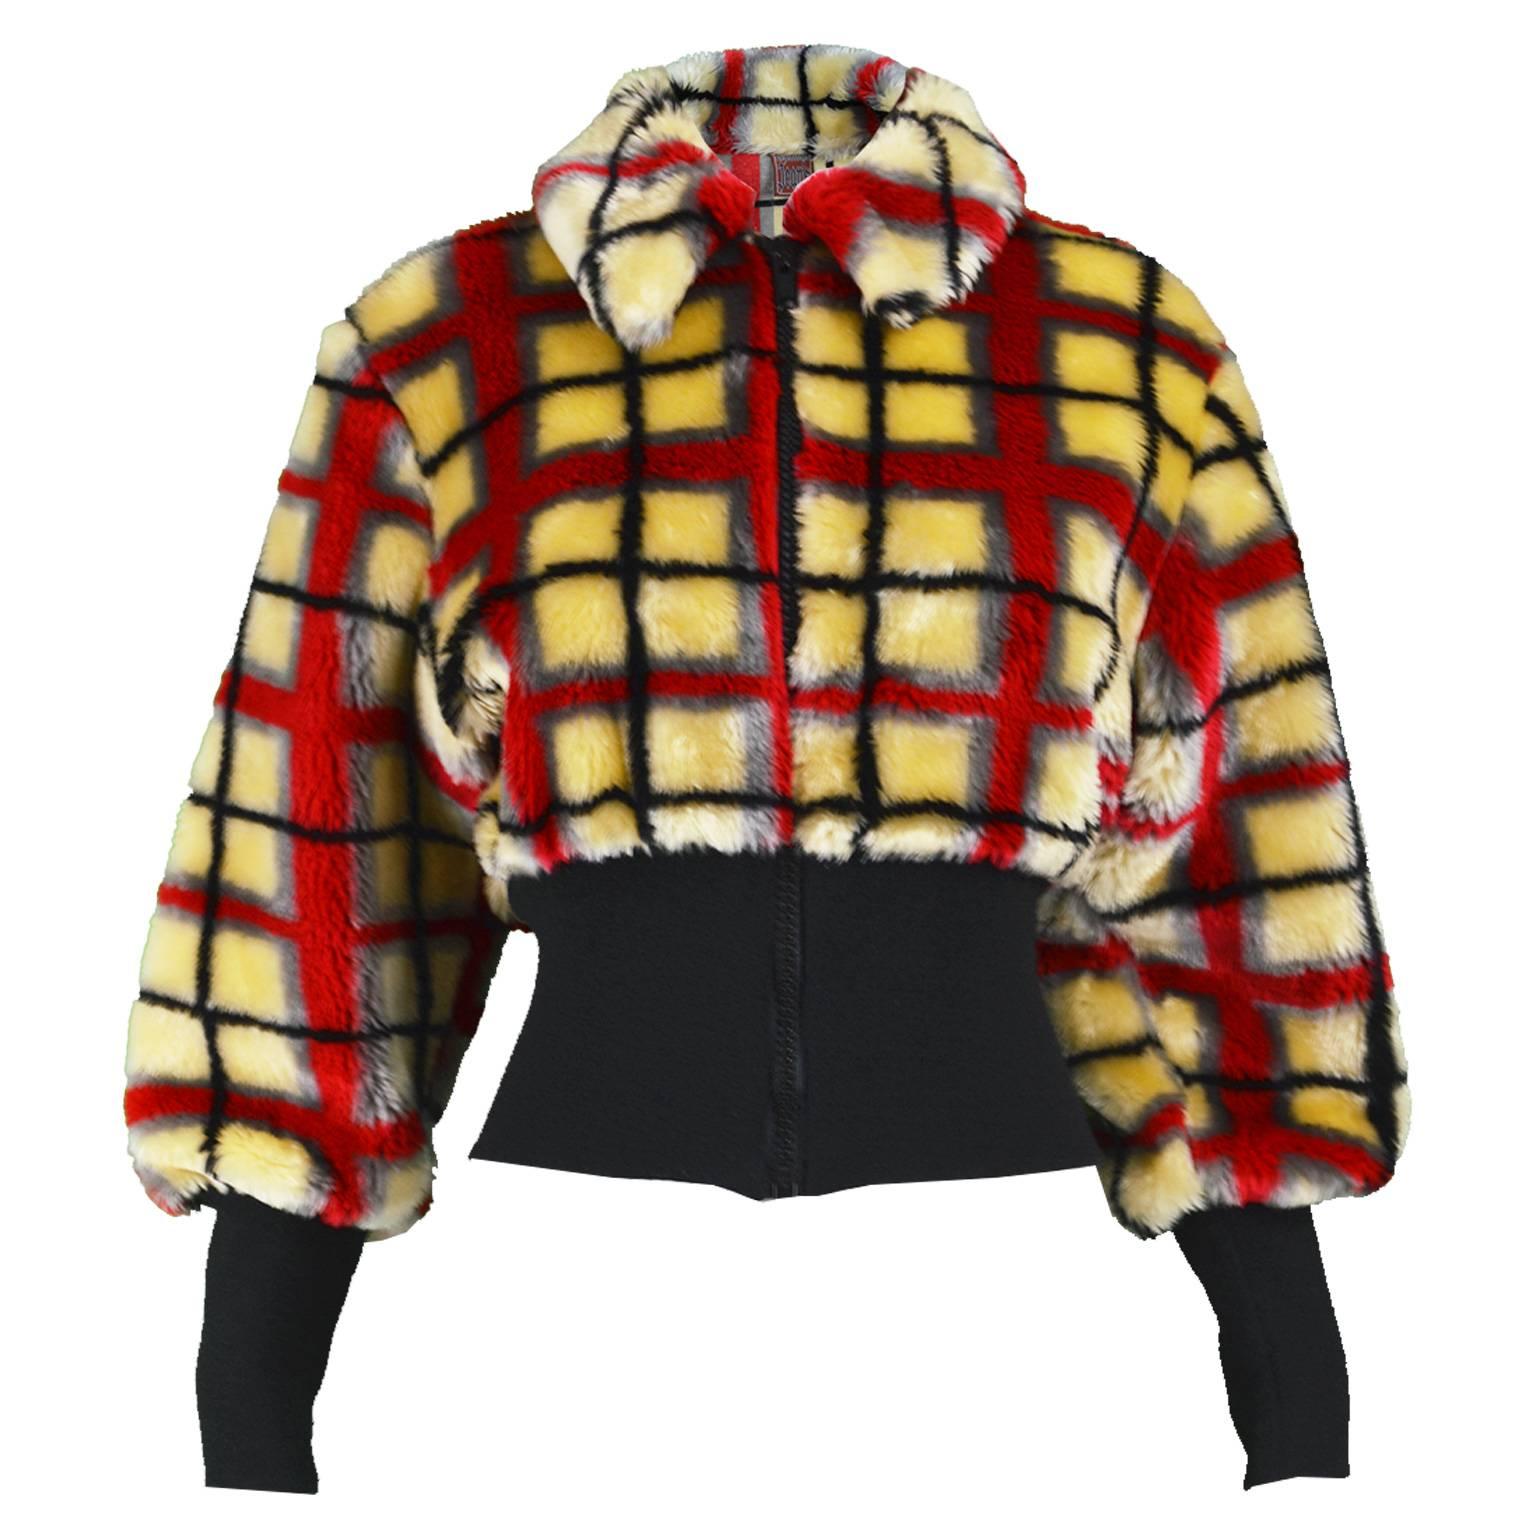 Jean Paul Gaultier Vintage Light Yellow and Red Checked Faux Fur